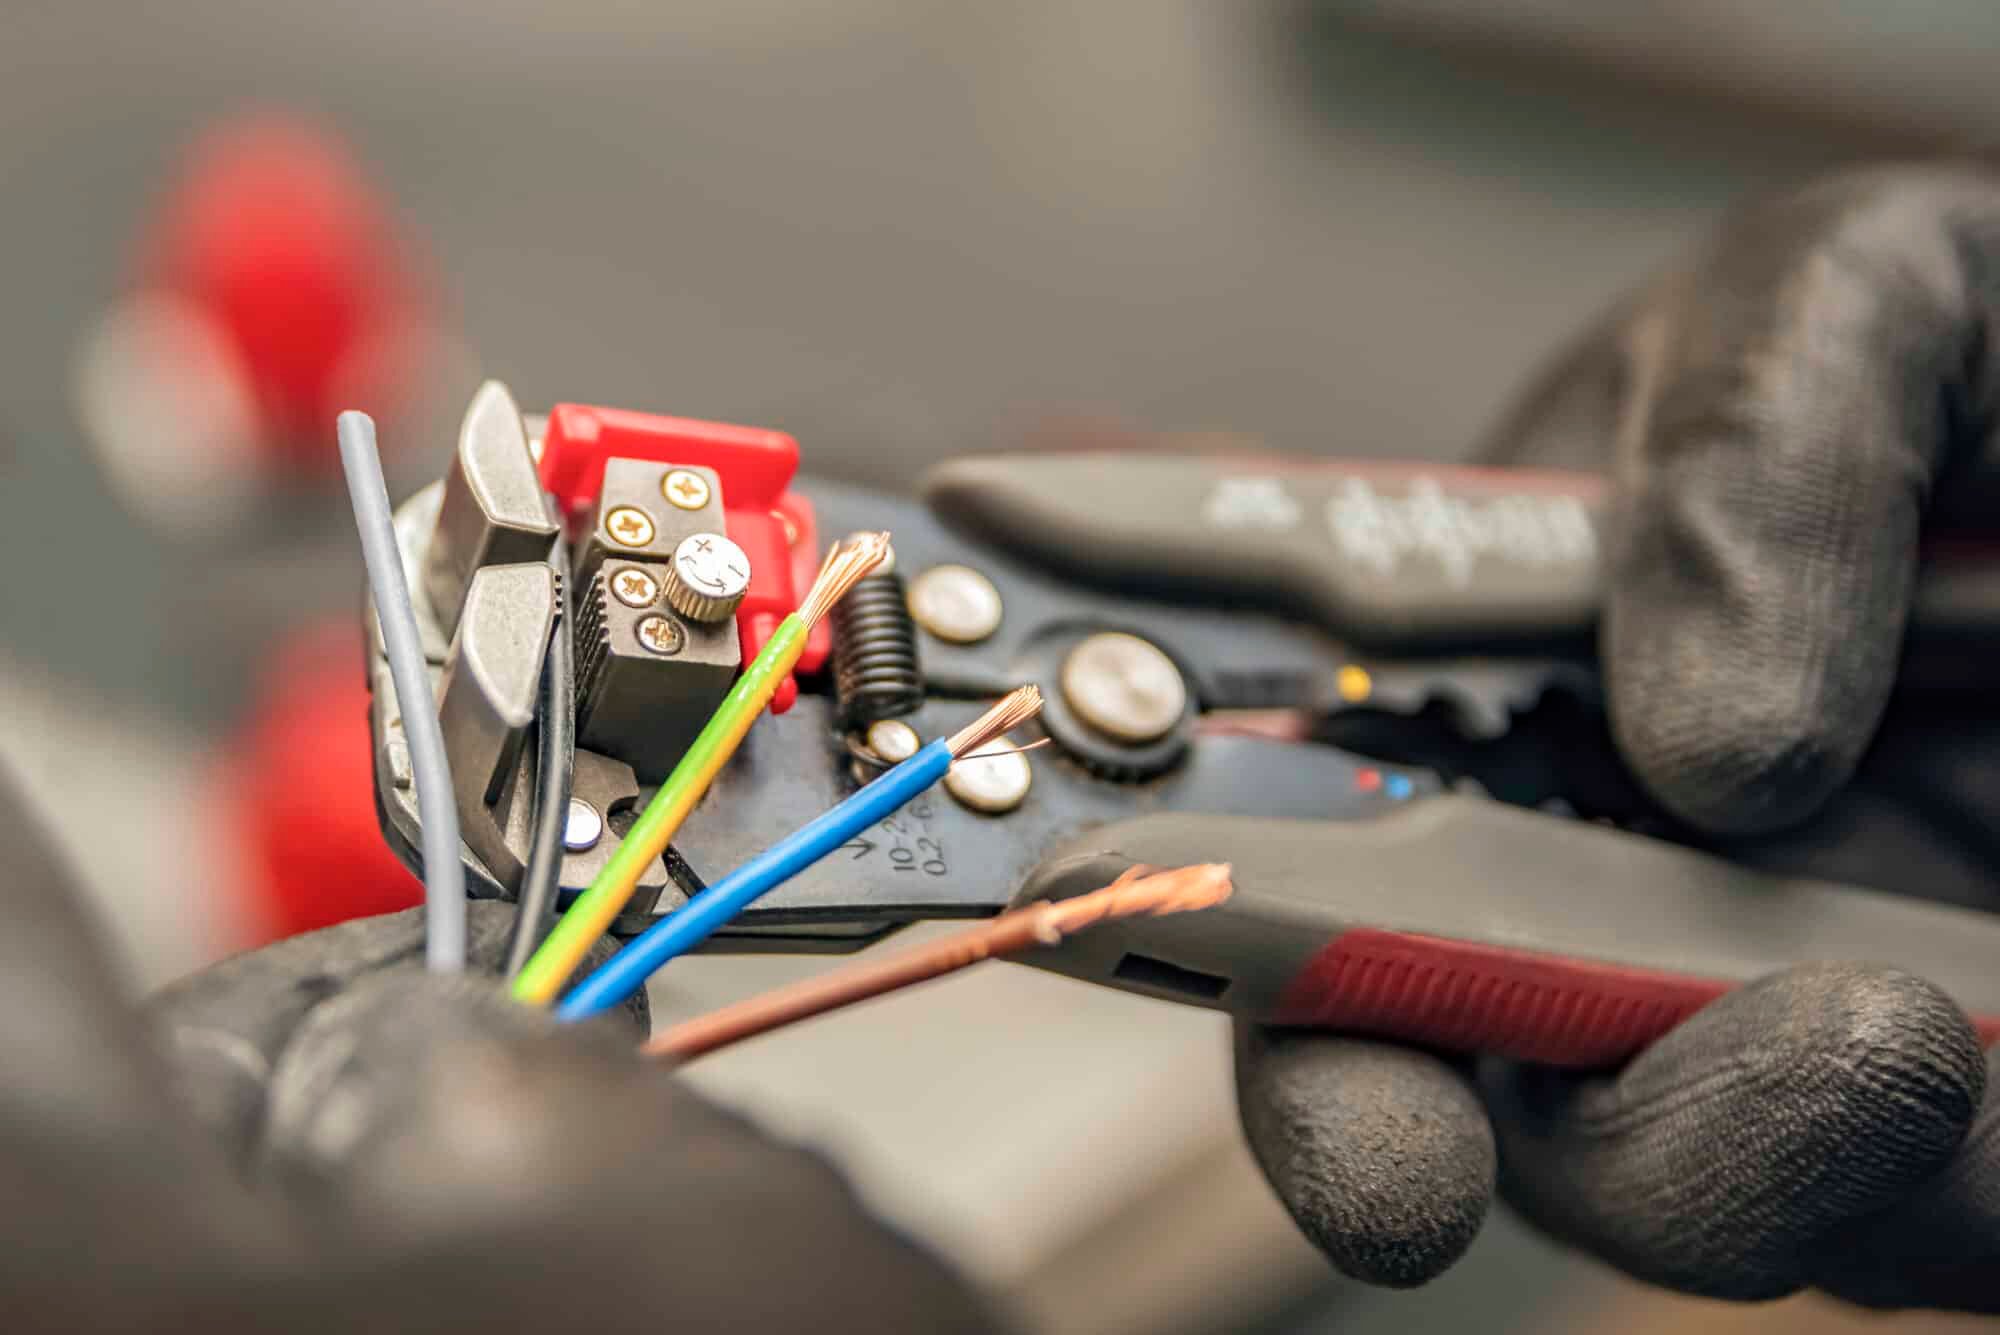 WHEN IS IT TIME TO UPDATE ELECTRICAL WIRING IN THE HOME?